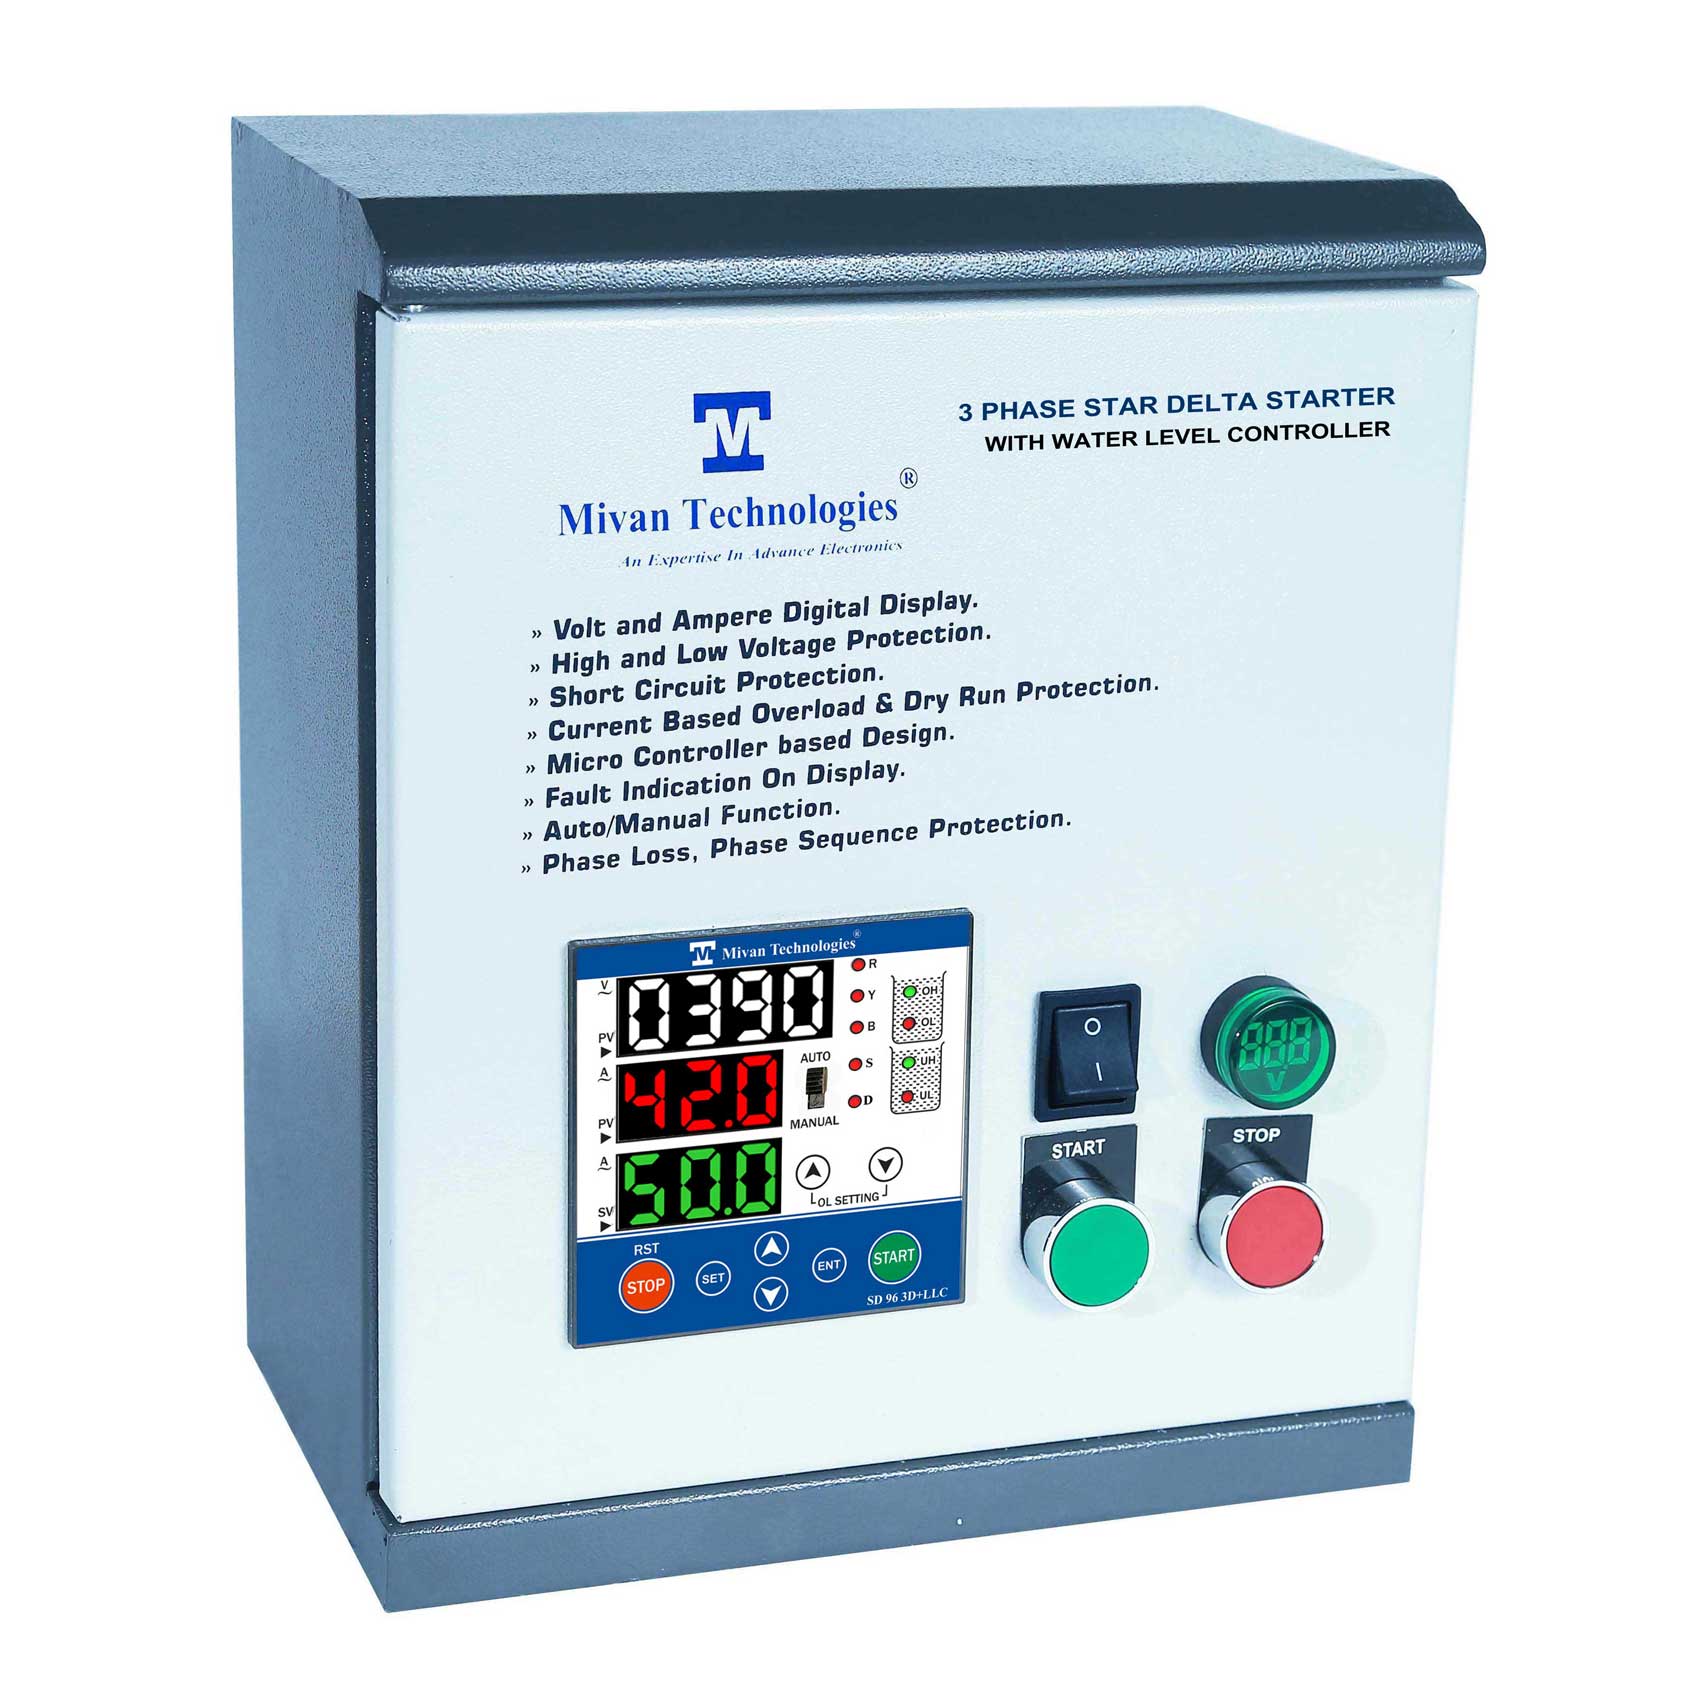 3 phase 3 display Heavy Duty water level controller with Star Delta motor starter with HV LV OL Dry protection with Auto switch spp and timer SD404040 for 20 HP motor